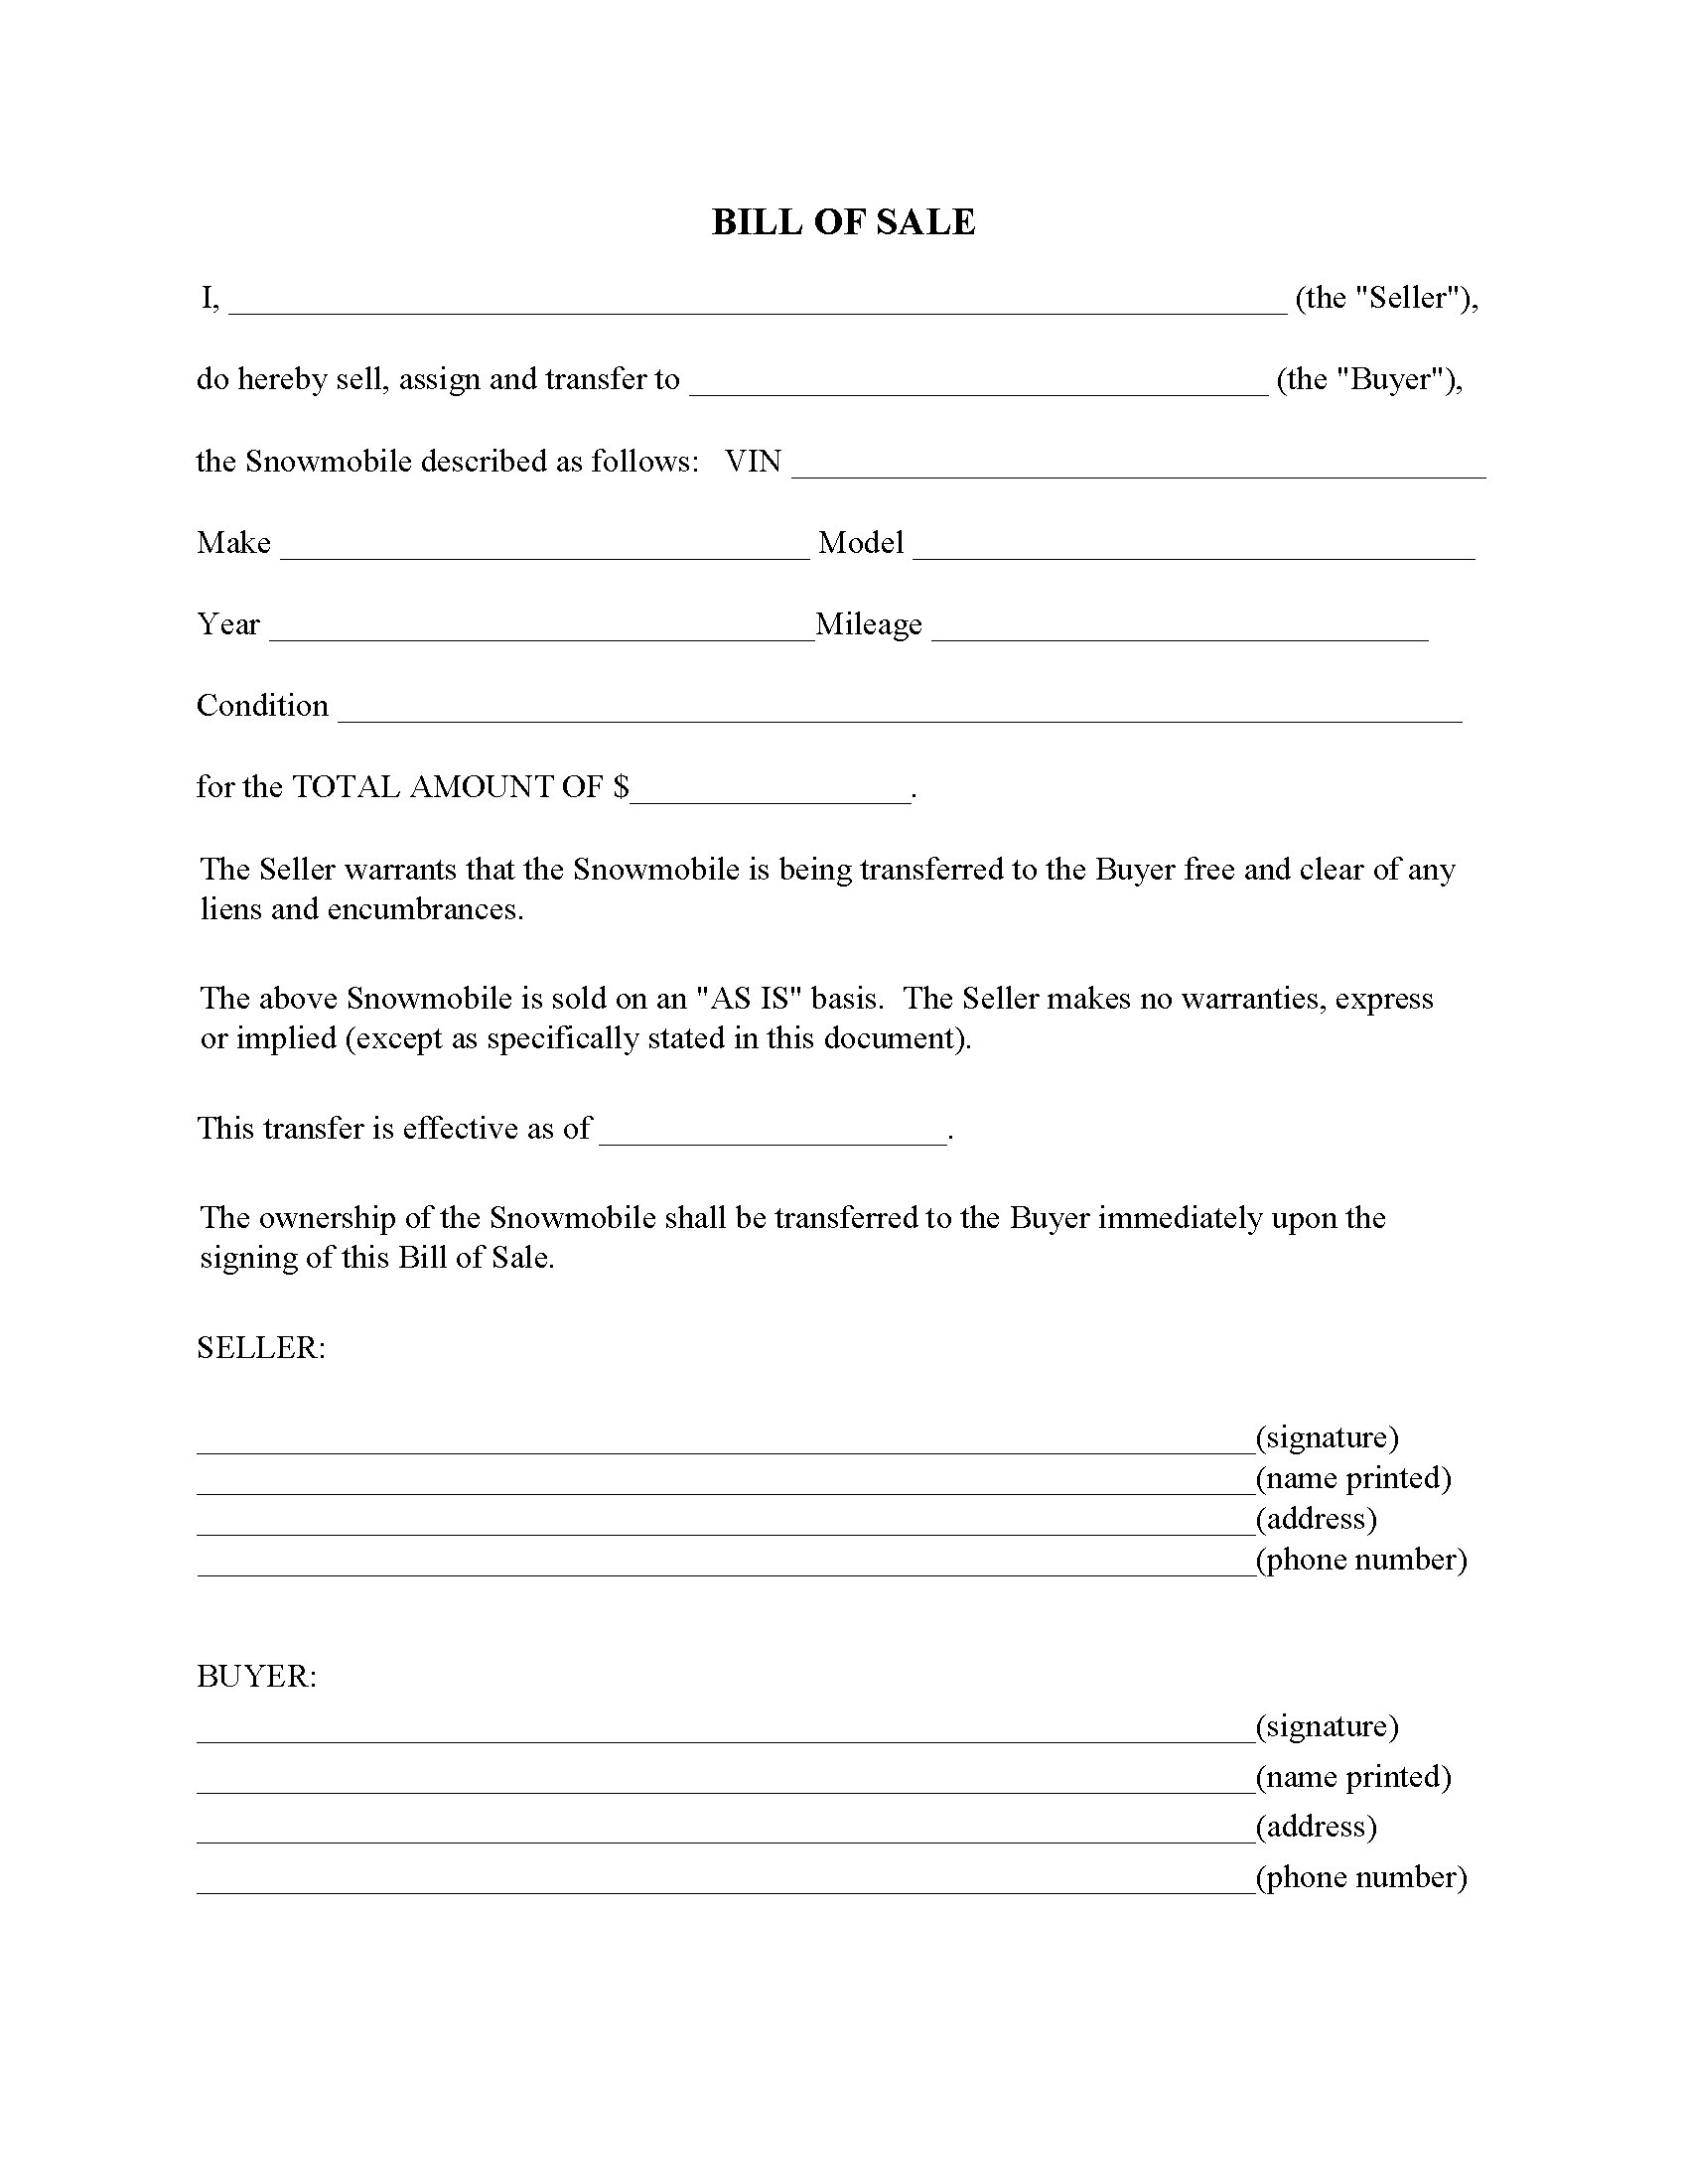 Snowmobile Bill Of Sale Form Free Printable Legal Forms